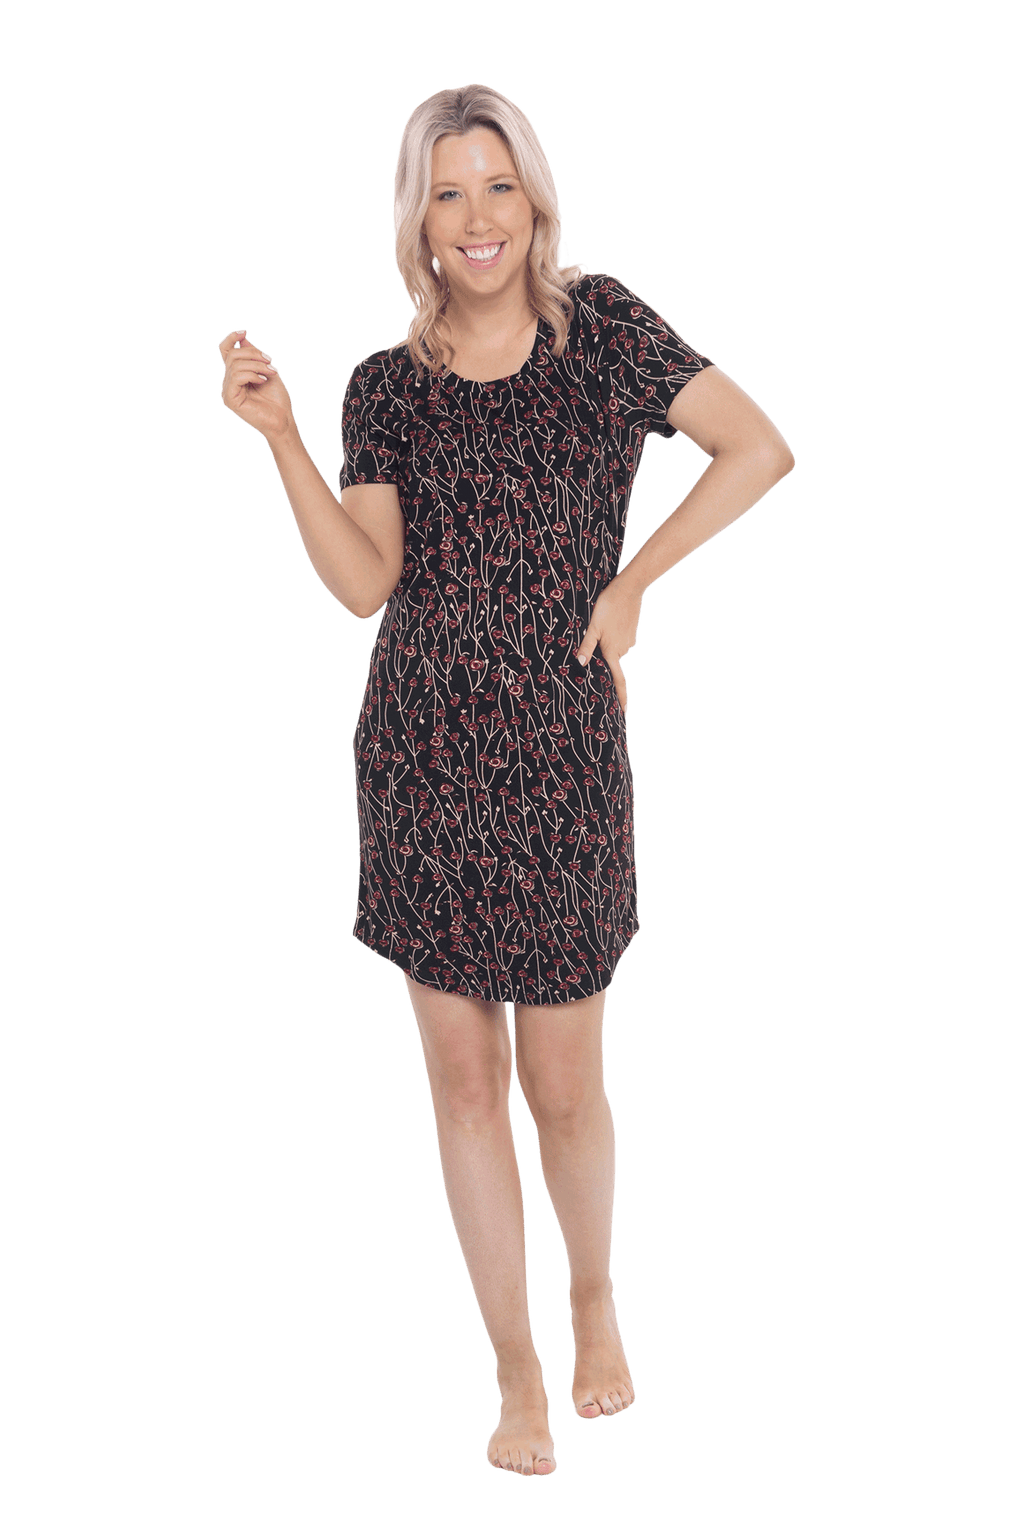 Petite model facing camera wearing black with small red rose patterned mid thigh length nightie, featuring rounded neckline, scooped hemline with short sleeves. Penny available in sizes 6-18